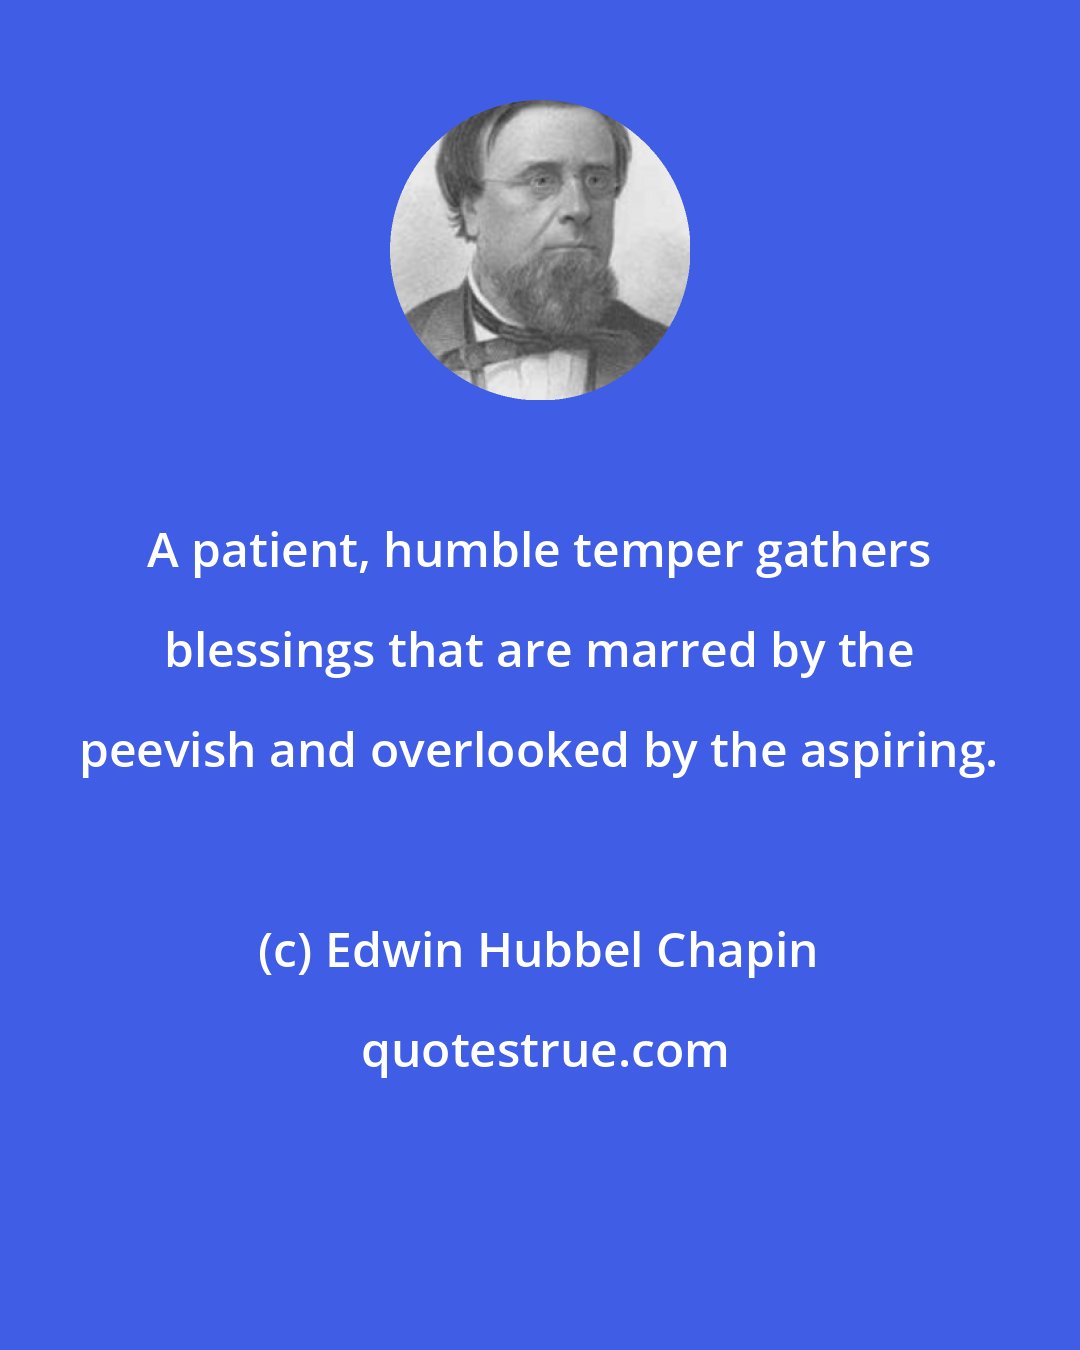 Edwin Hubbel Chapin: A patient, humble temper gathers blessings that are marred by the peevish and overlooked by the aspiring.